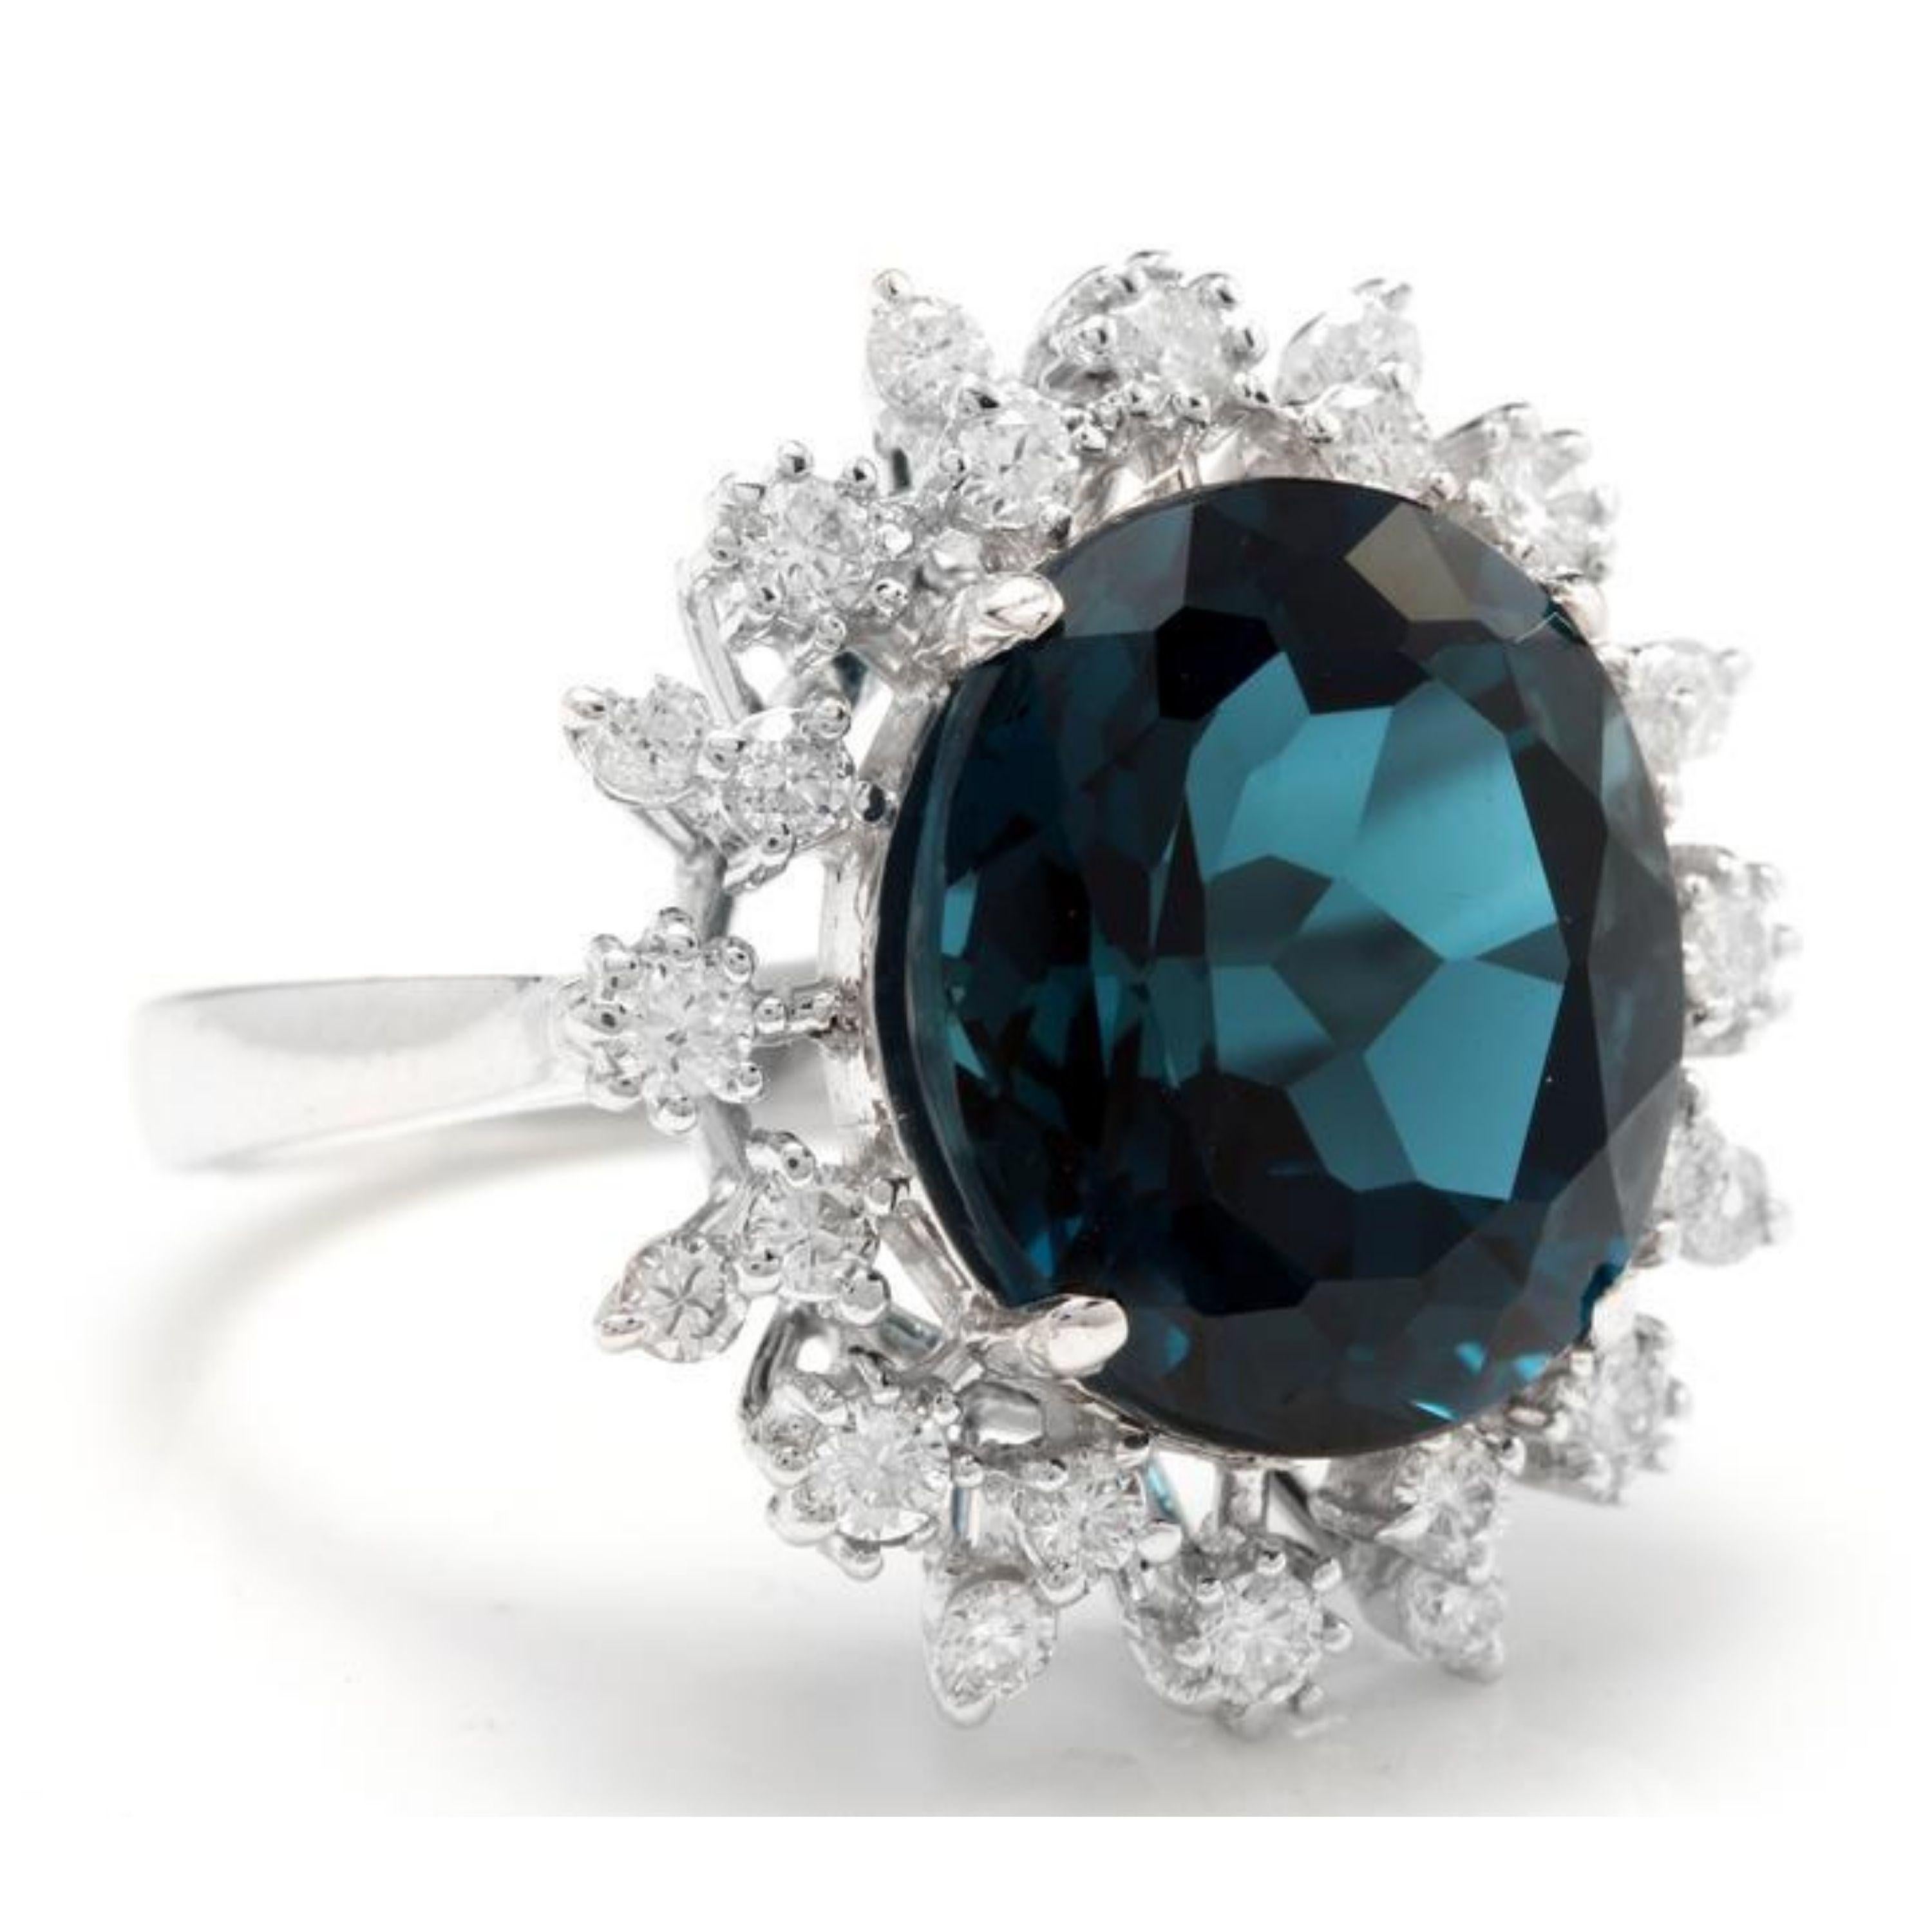 11.80 Carats Exquisite London Blue Topaz and Diamond 14K Solid White Gold Ring

Total Topaz Weight is Approx. 11.00 Carats

Topaz Measures: Approx. 14.00 x 12.00mm

Topaz Treatment: Heating, Irradiation

Natural Round Diamonds Weight: Approx. 0.80